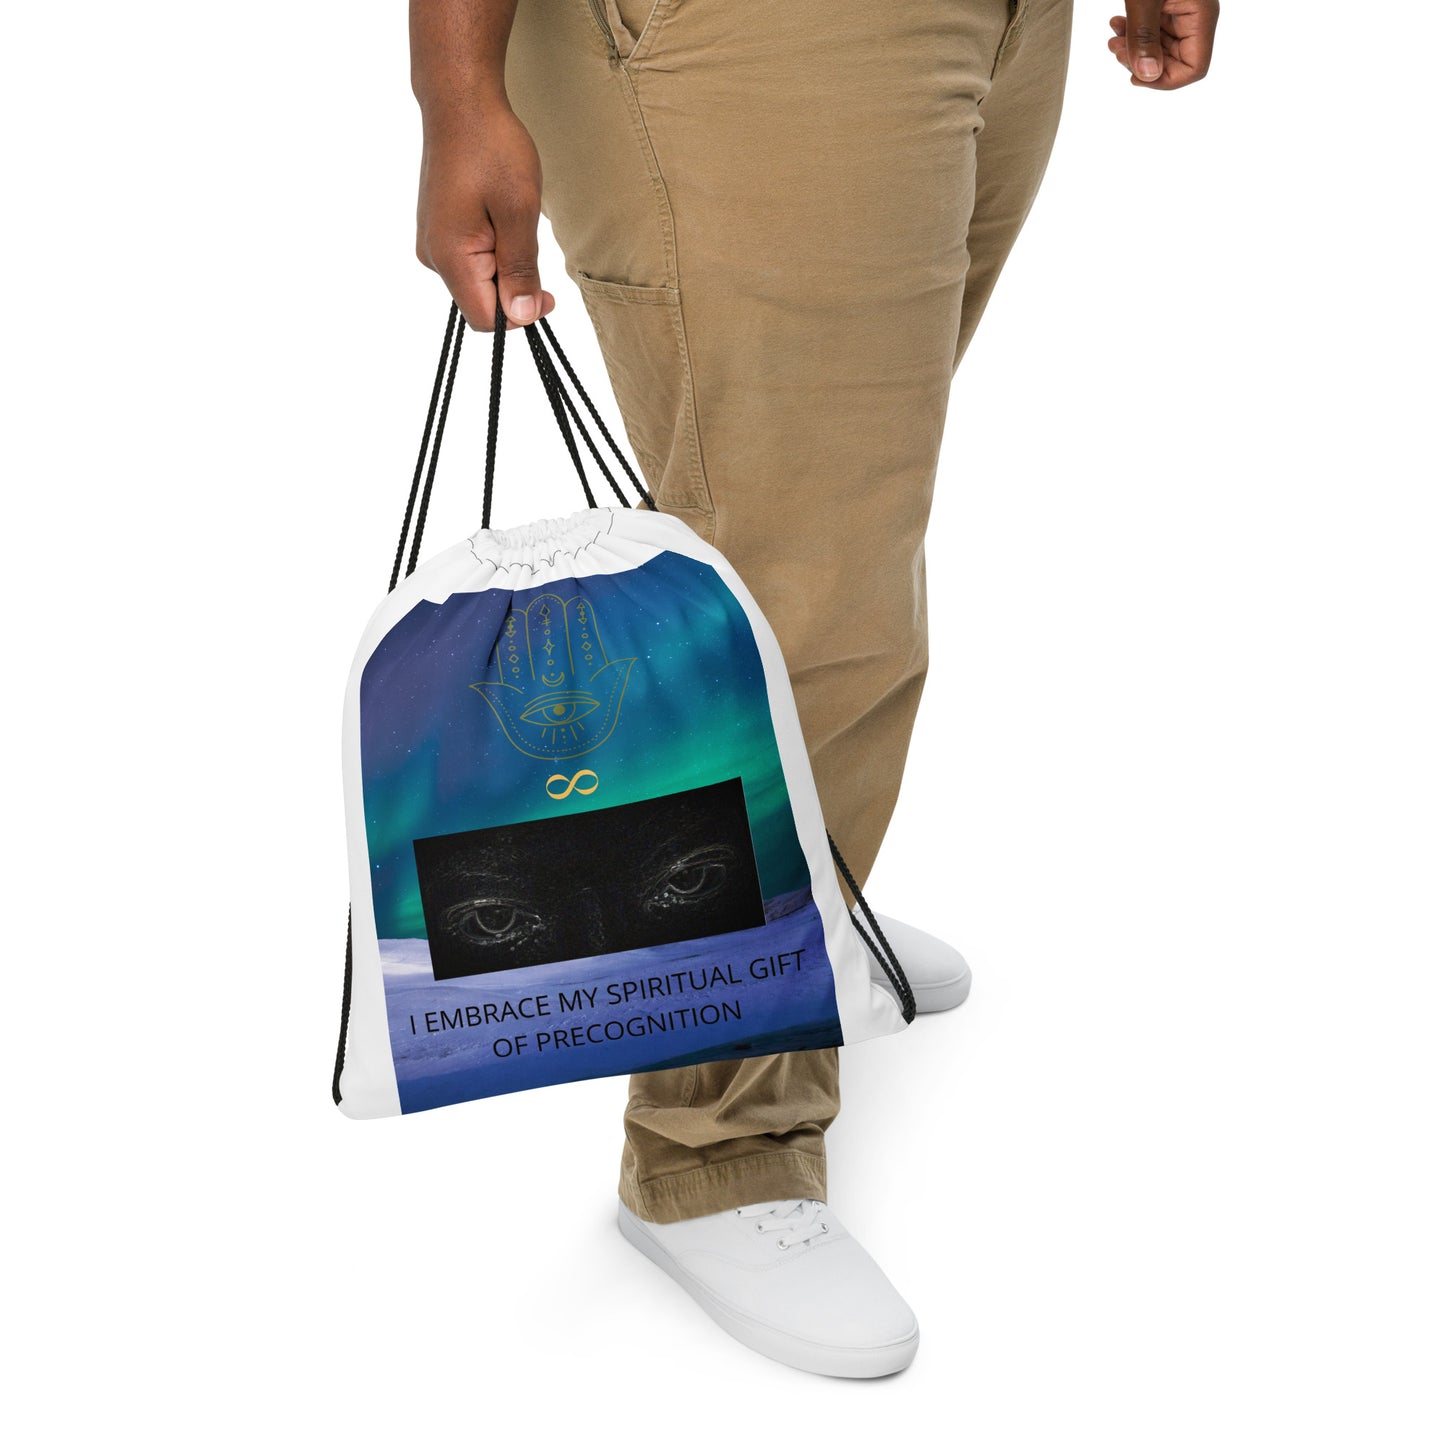 White bag with black drawstrings. Colorful bluish/greenish sky design of polar lights/aurora borealis. Green hamsa hand and yellow infinity symbol logo. Grayish/white outline of a pair of eyes. Other-worldly, supernatural, paranormal tagline "I Embrace My Spiritual Gift Of Precognition." Shown hanging down from model's hand, white background. JAMILLIAH'S WISDOM IS TIMELESS SHOP - wisdomistimeless.com.